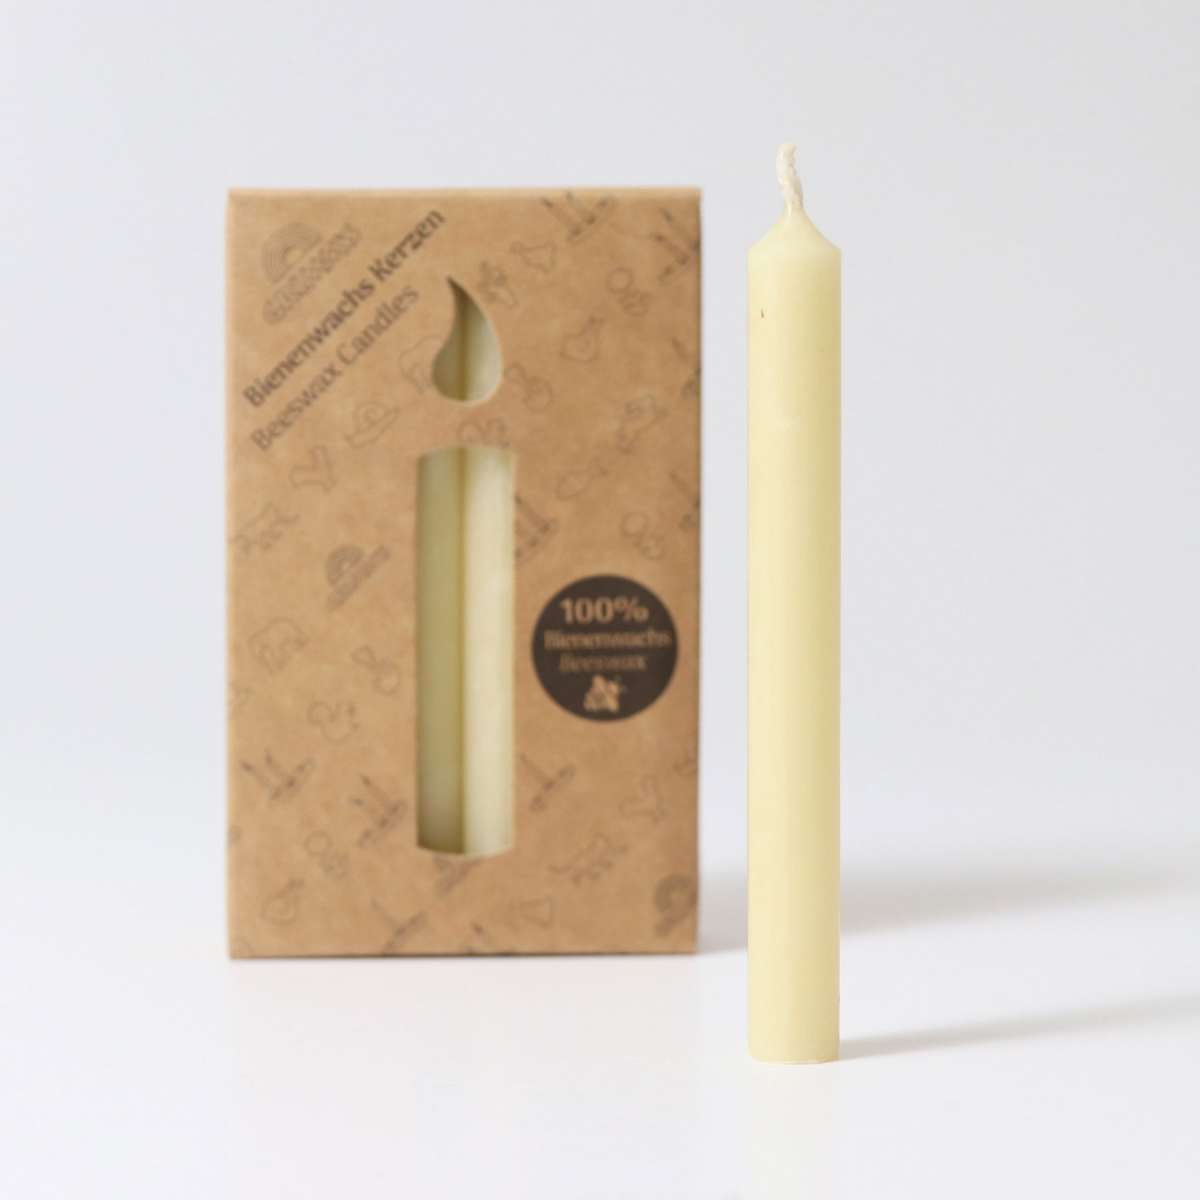 Grimm's Creme Beeswax Candles (100%) 12 pcs